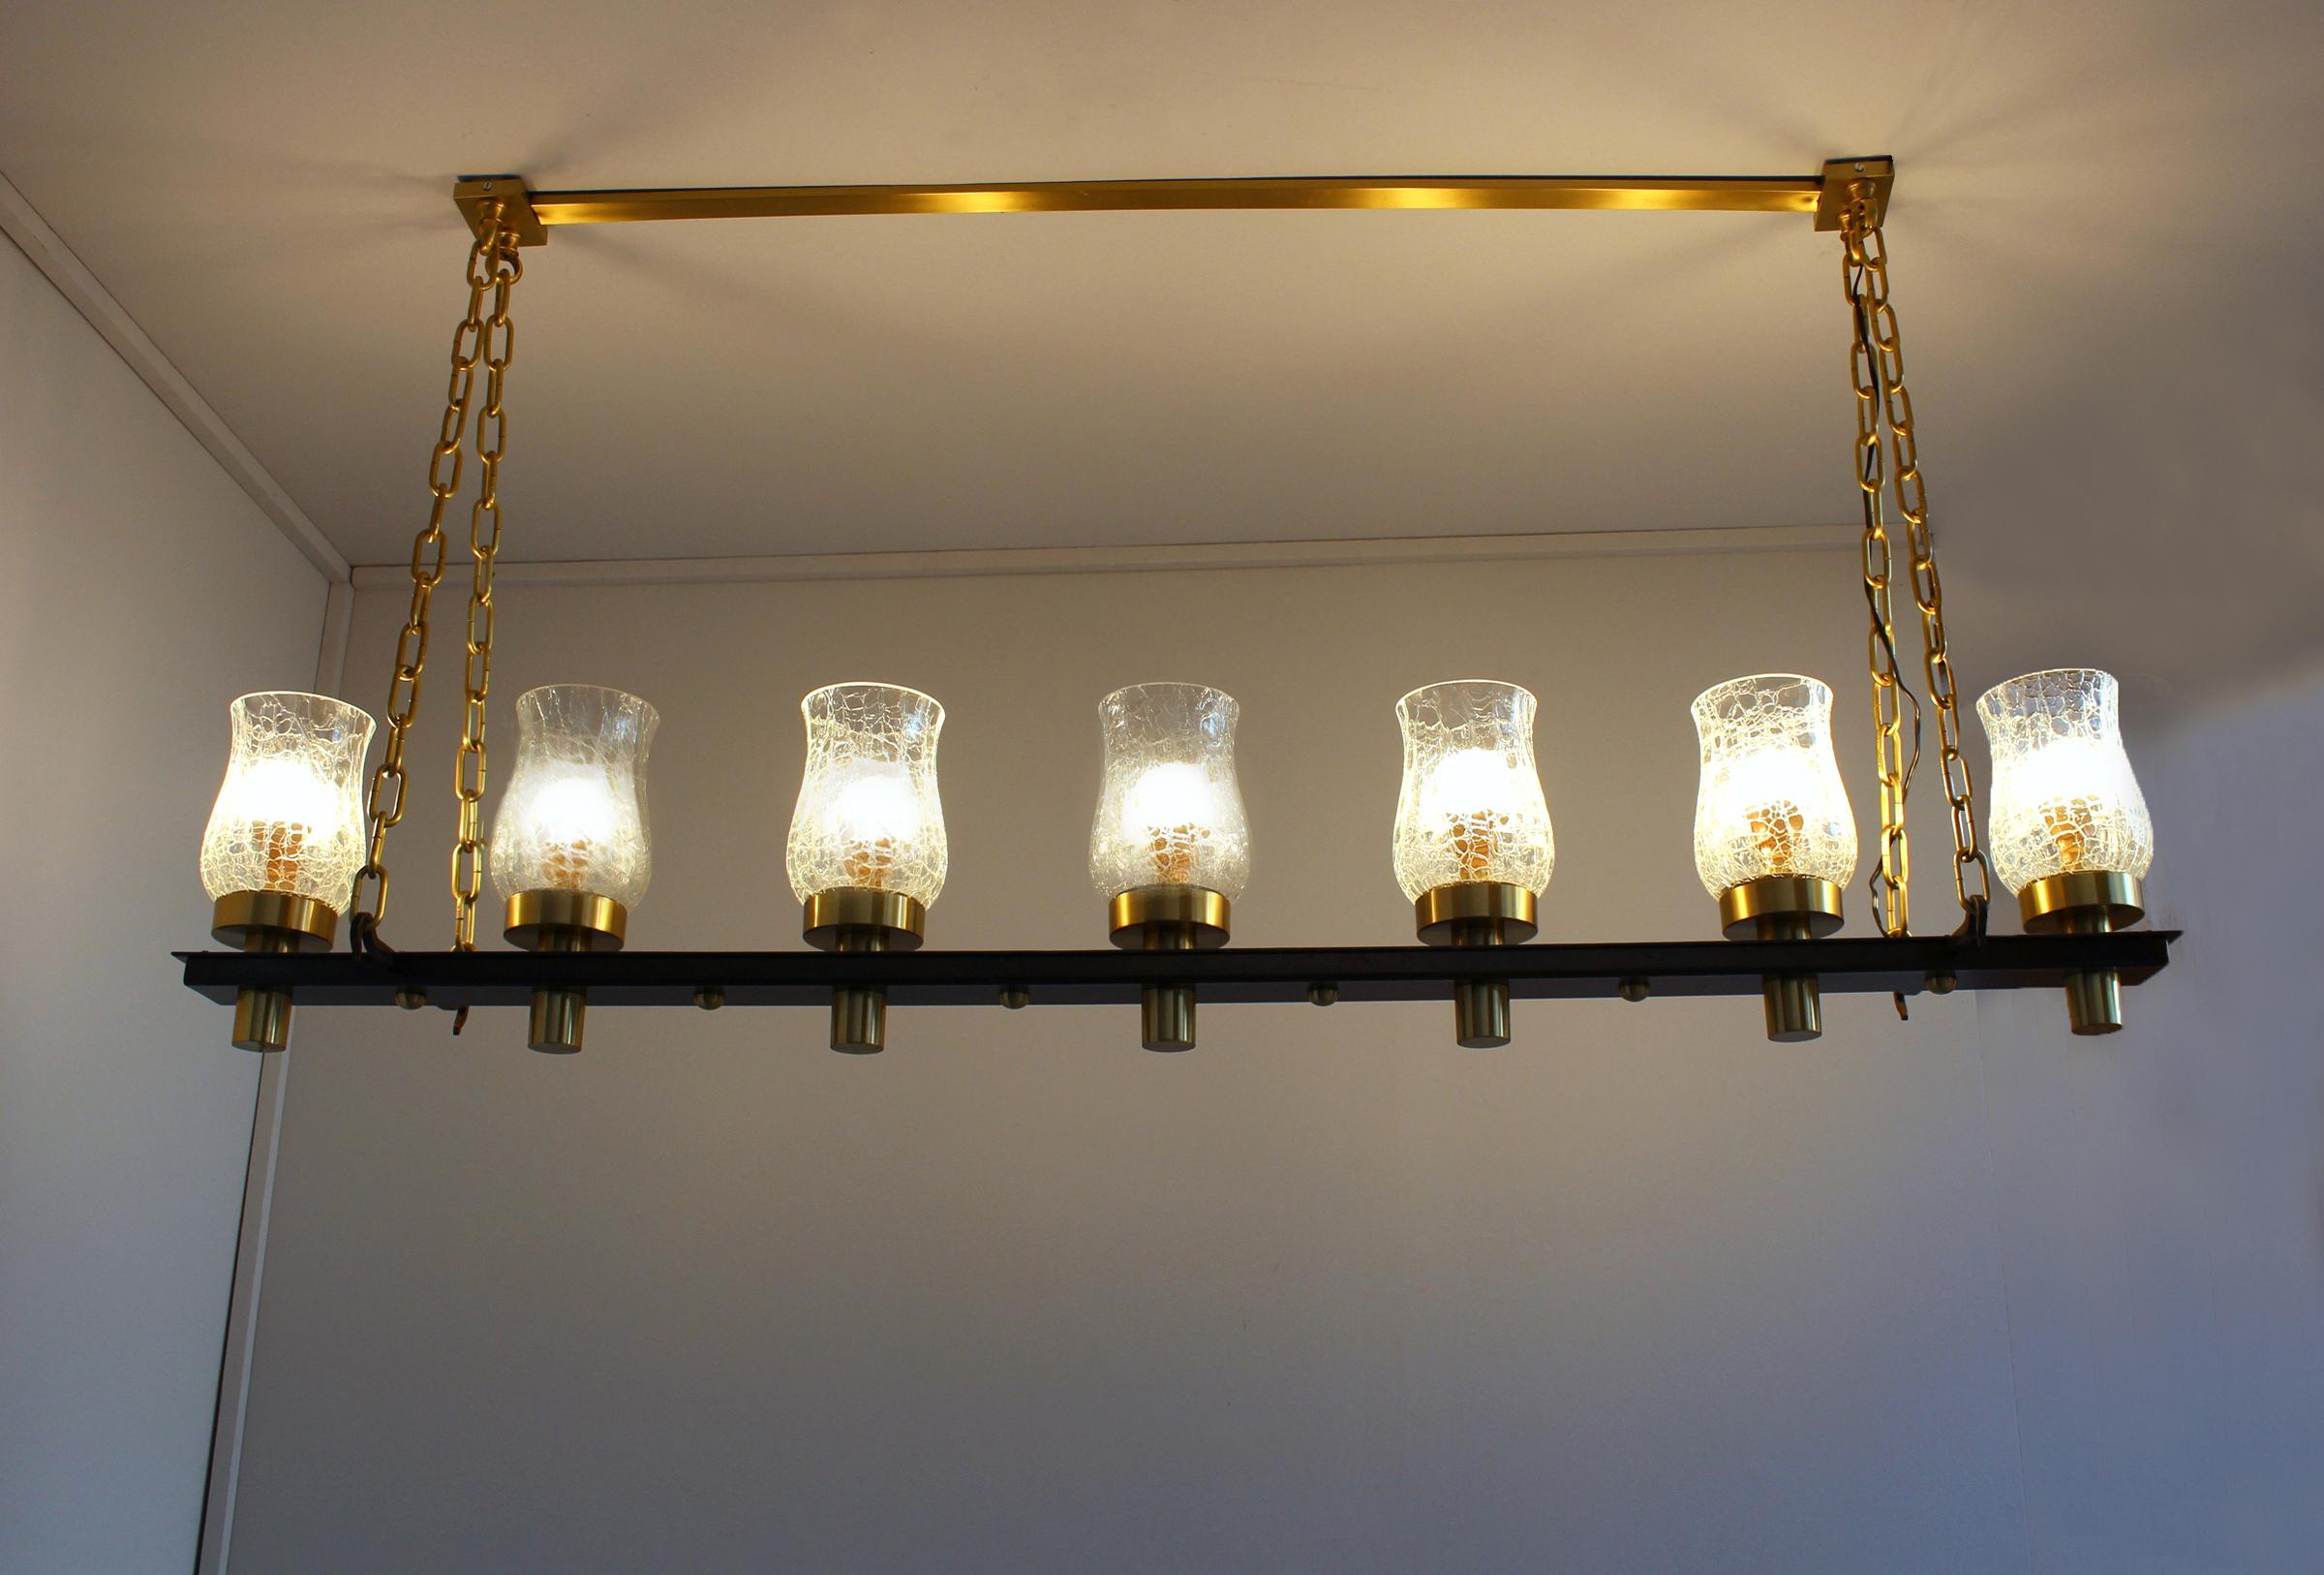 Jean Perzel - A fine French midcentury linear pendant with a brass and metal frame that holds seven crackled glass tulip shades.